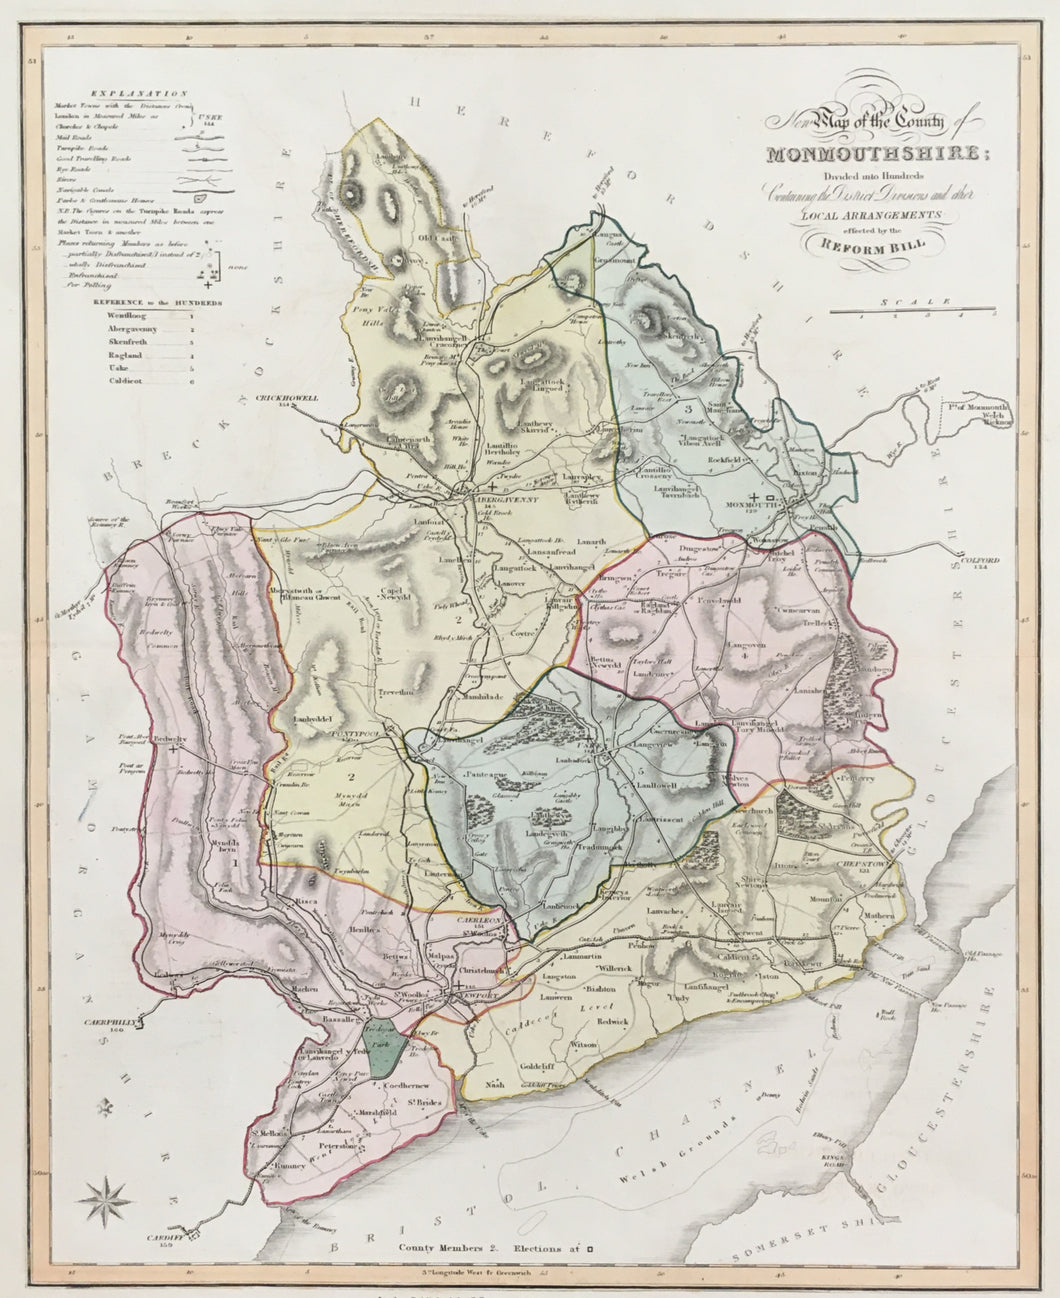 Ebden, William “New Map of the County of Monmouthshire.”